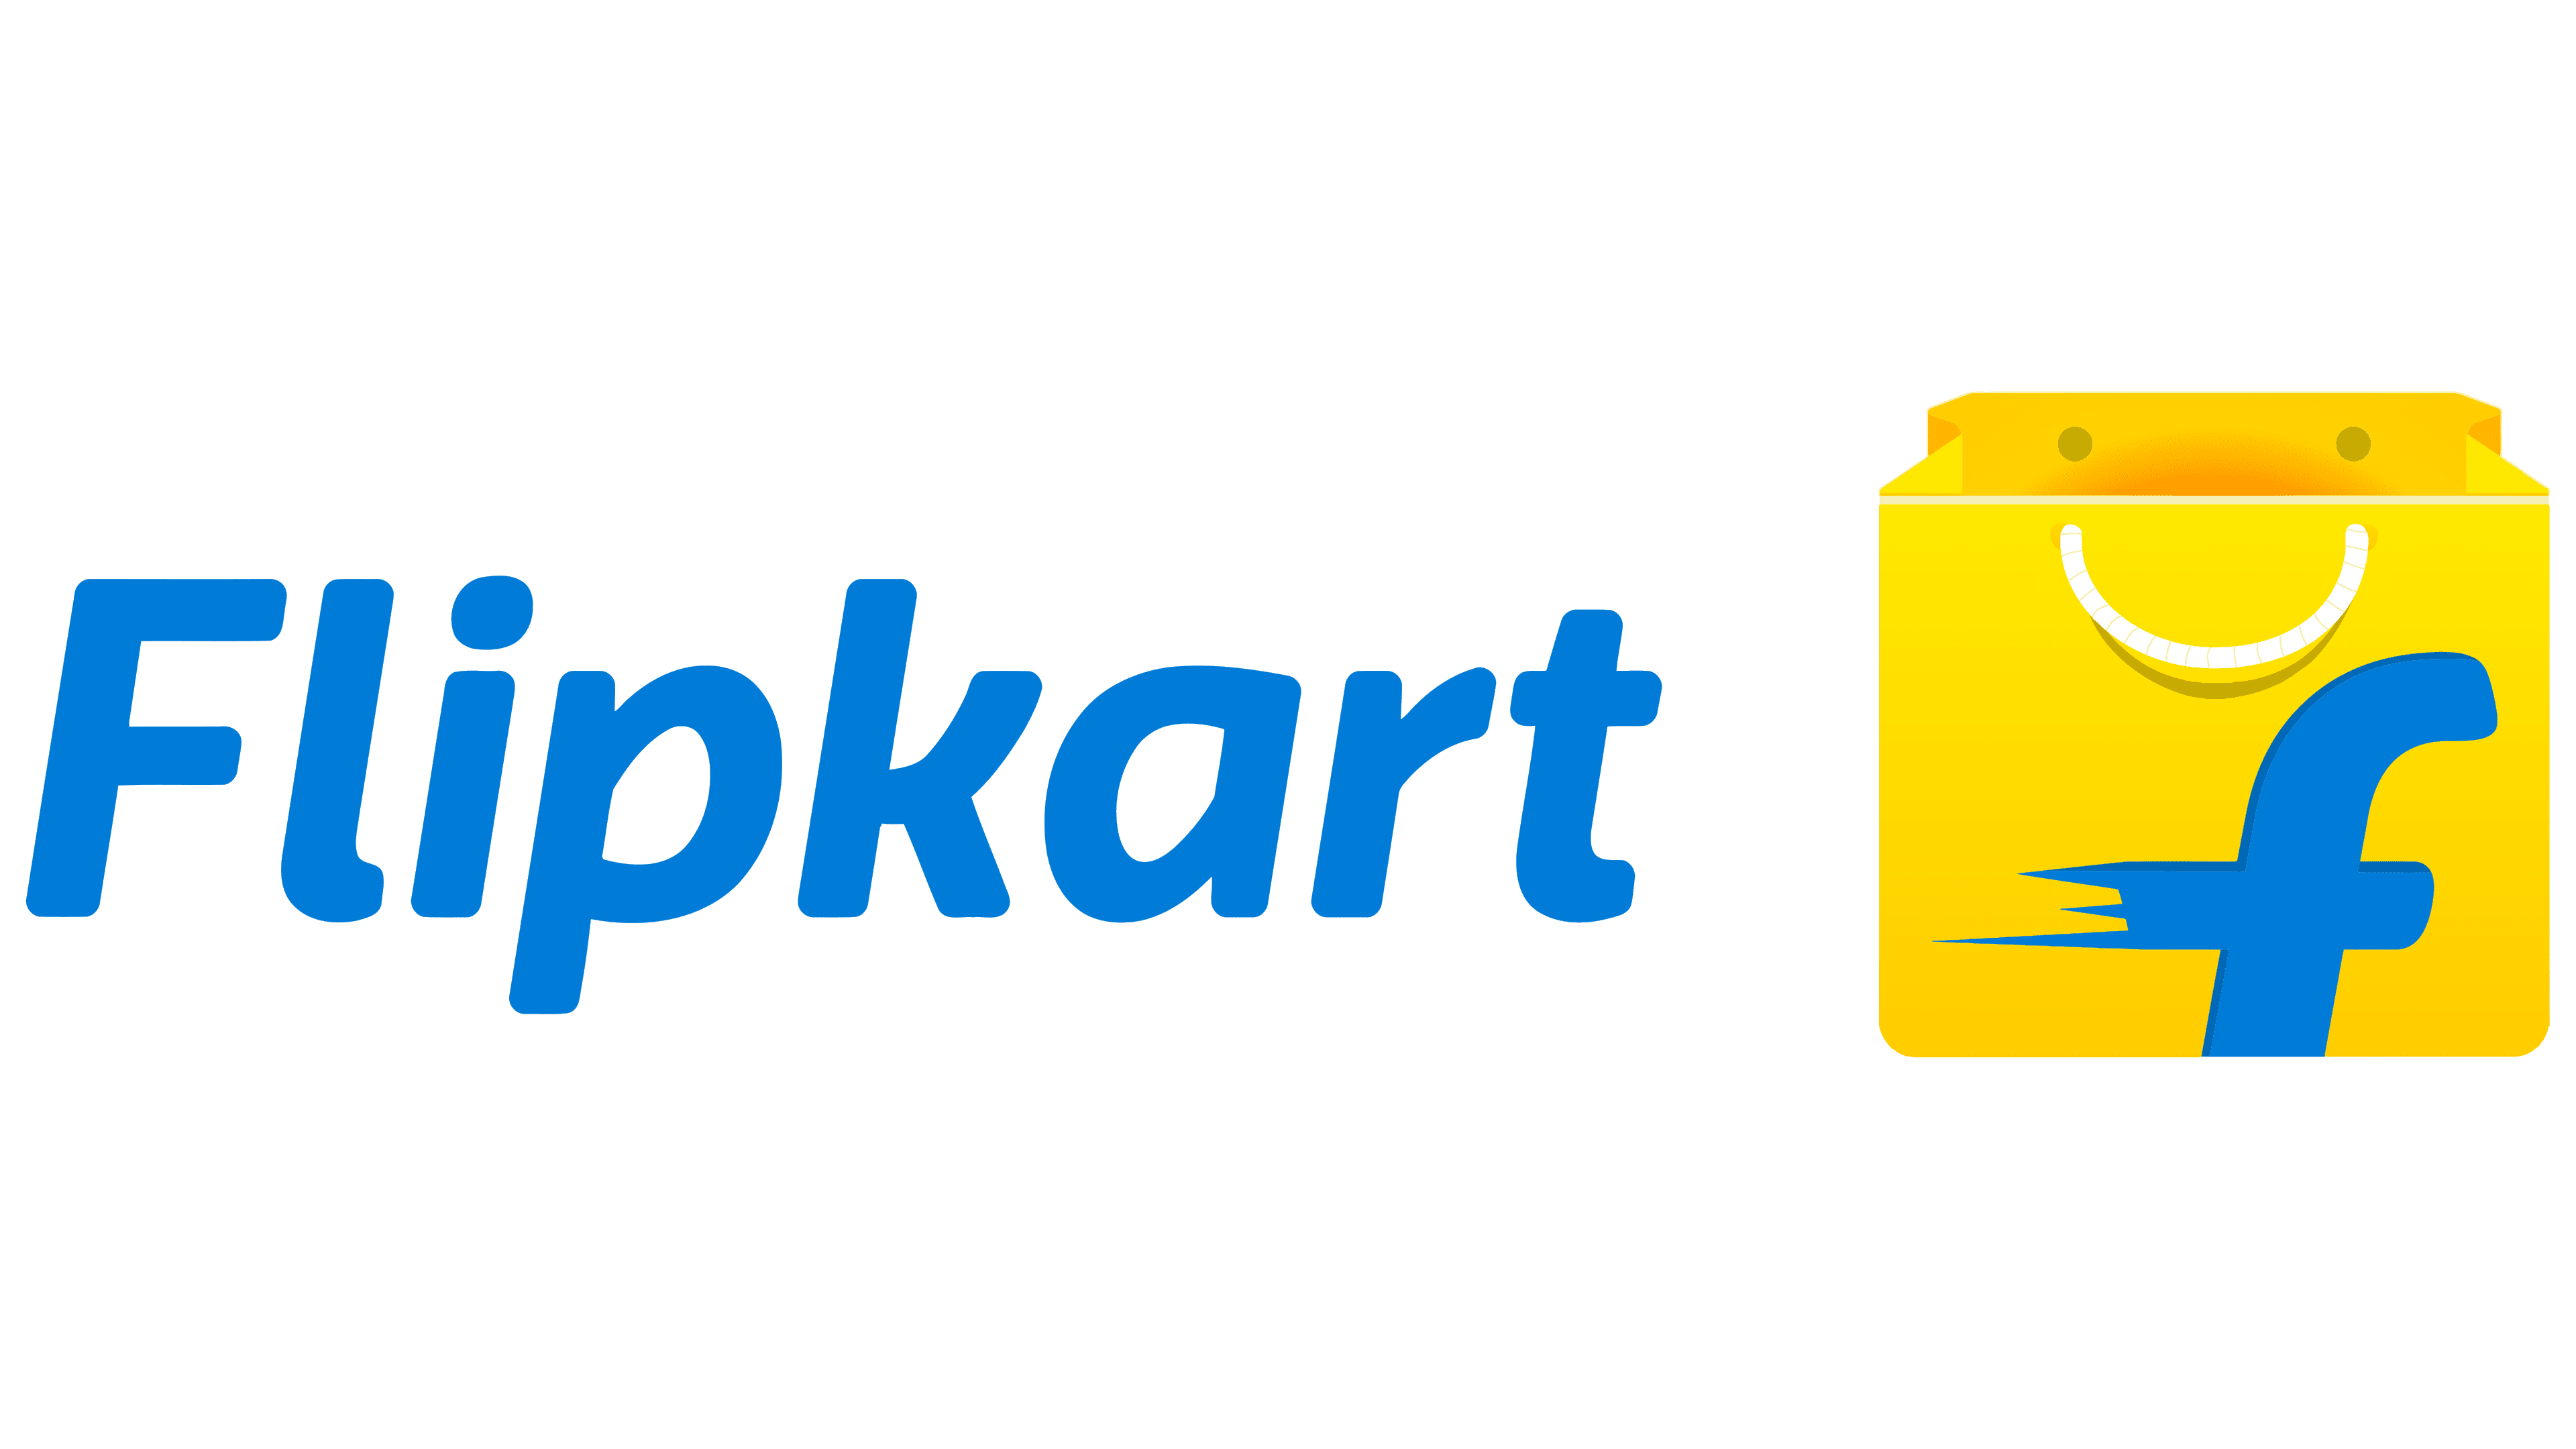 Flipkart Marketplace enhances its best-in-class seller-friendly policies to encourage digital adoption among MSMEs